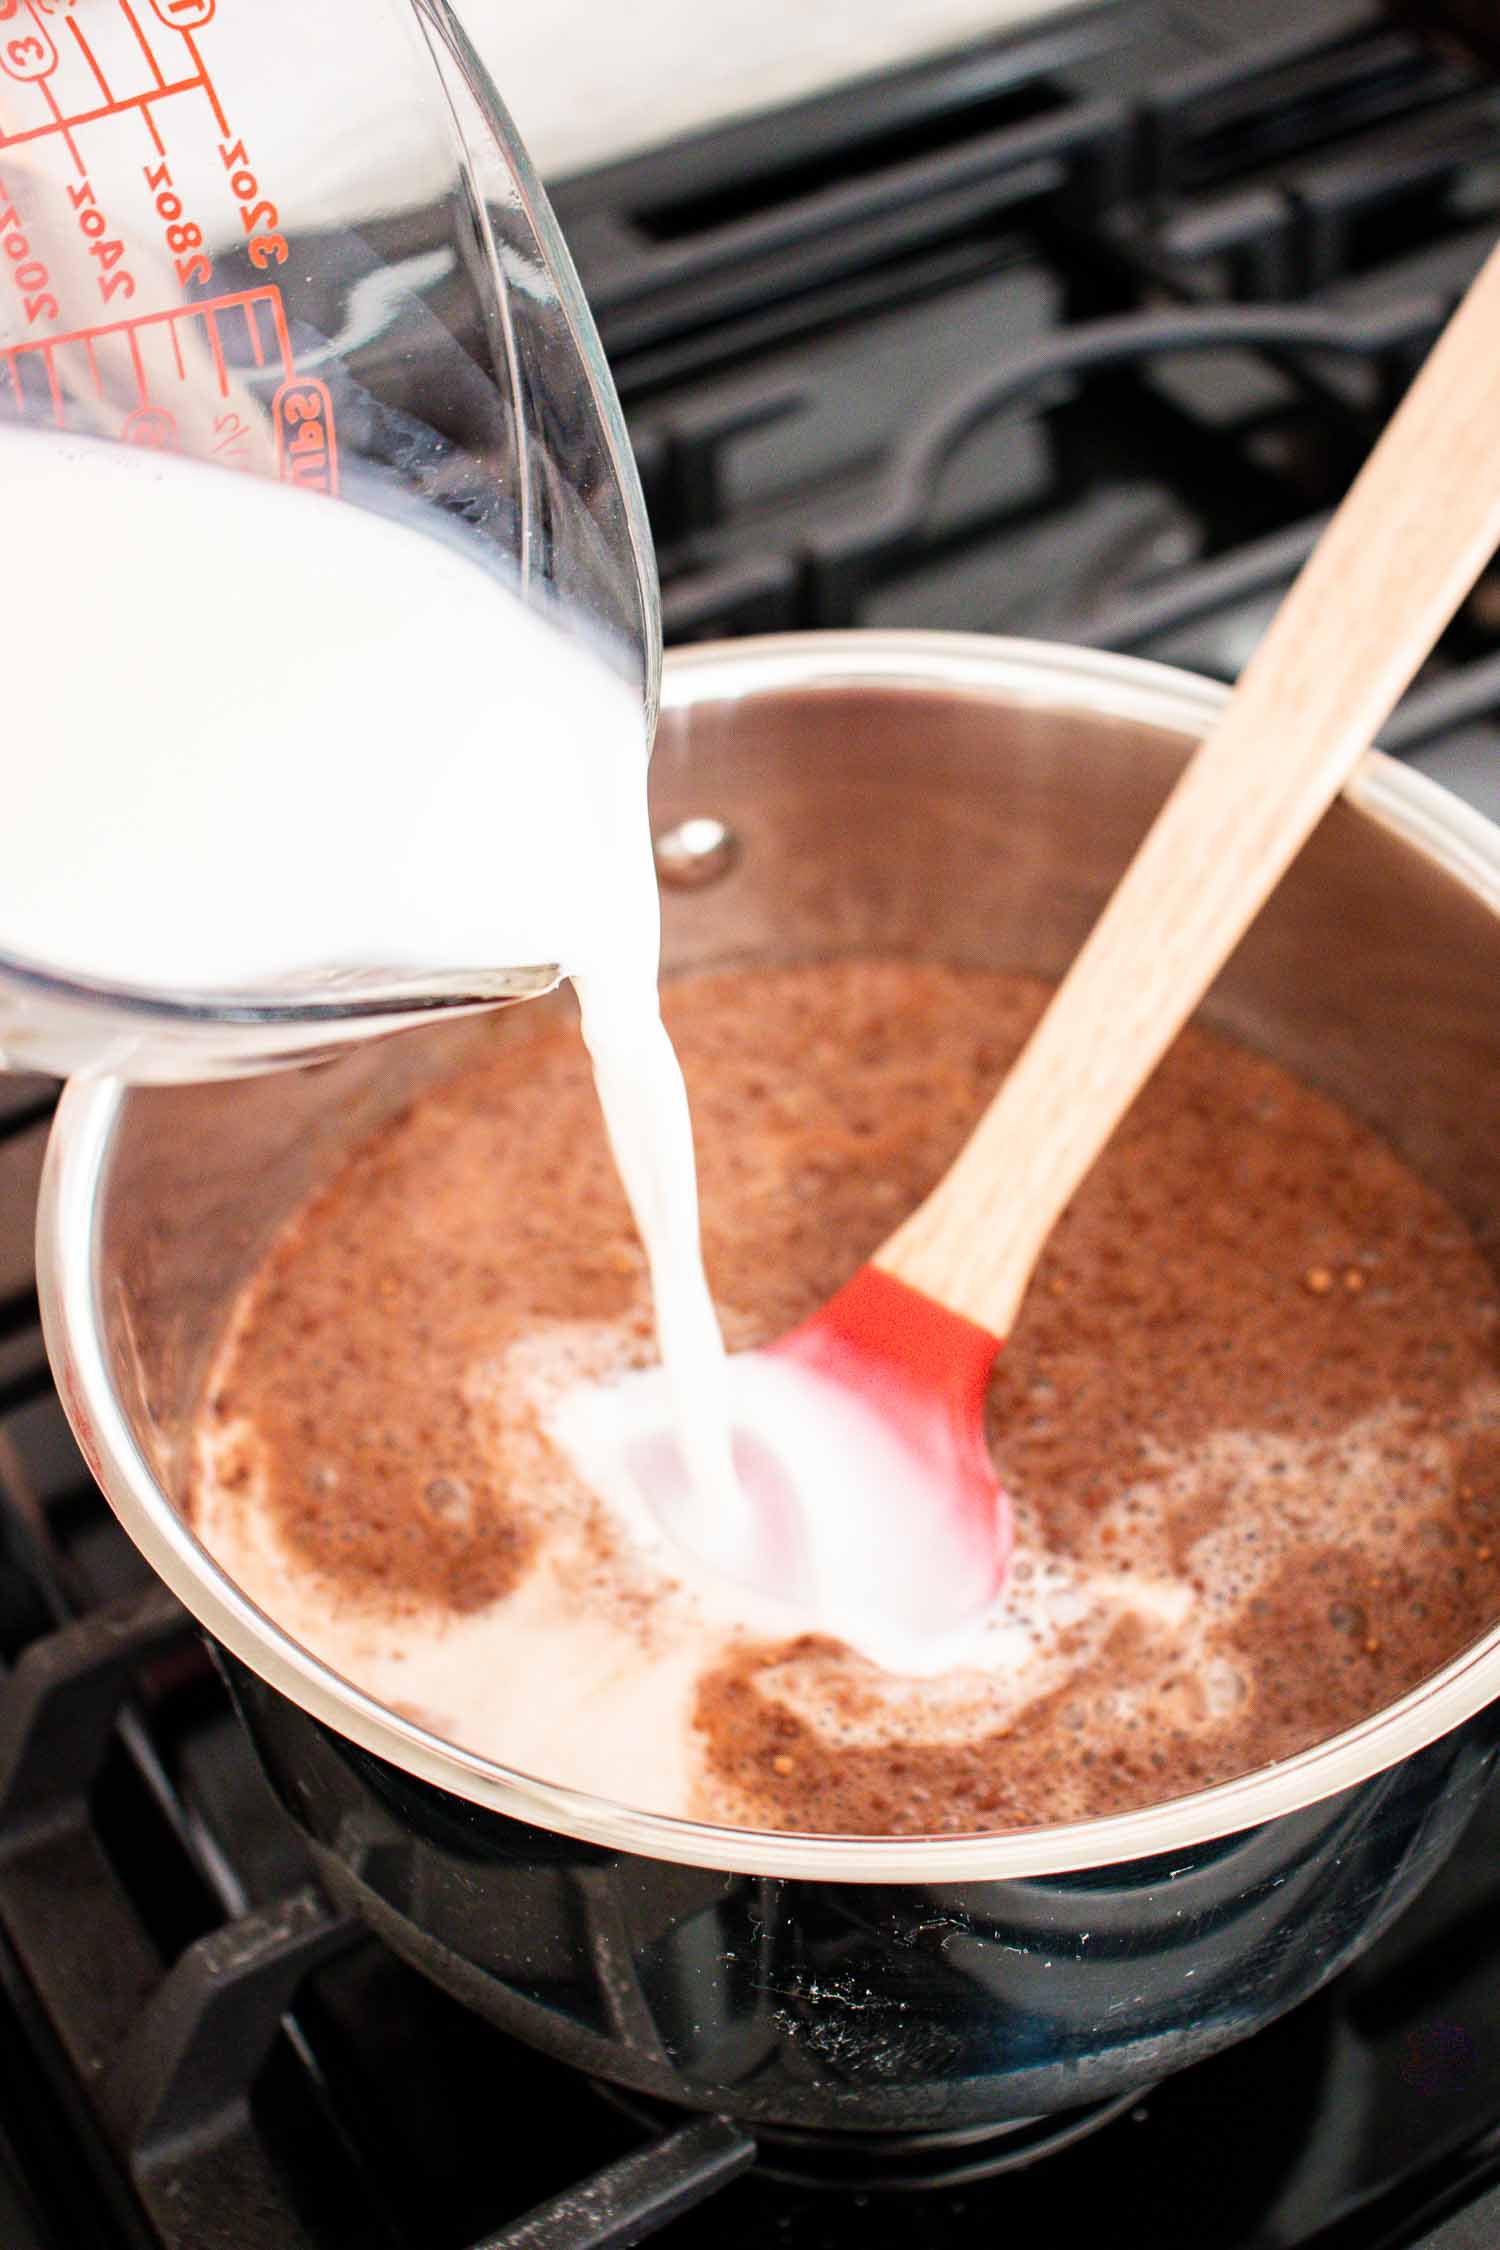 A metal pan with hot chocolate in it with milk pouring into the pan. there is a red spatula in the pan.